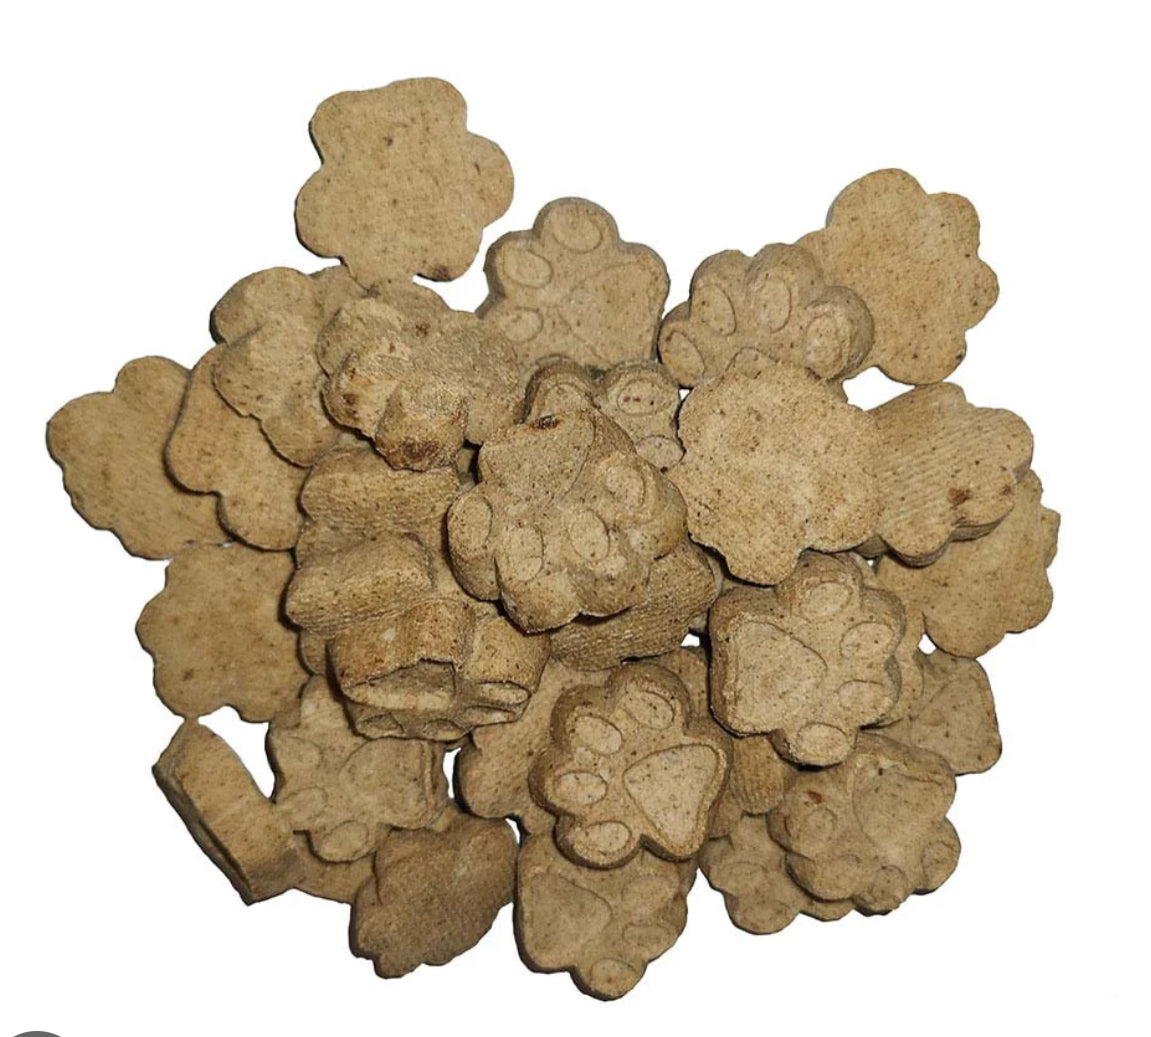 American Apple Pie - All Natural "Apple" Horse Treats - Disobedient Biscuits 6 oz. Pouch